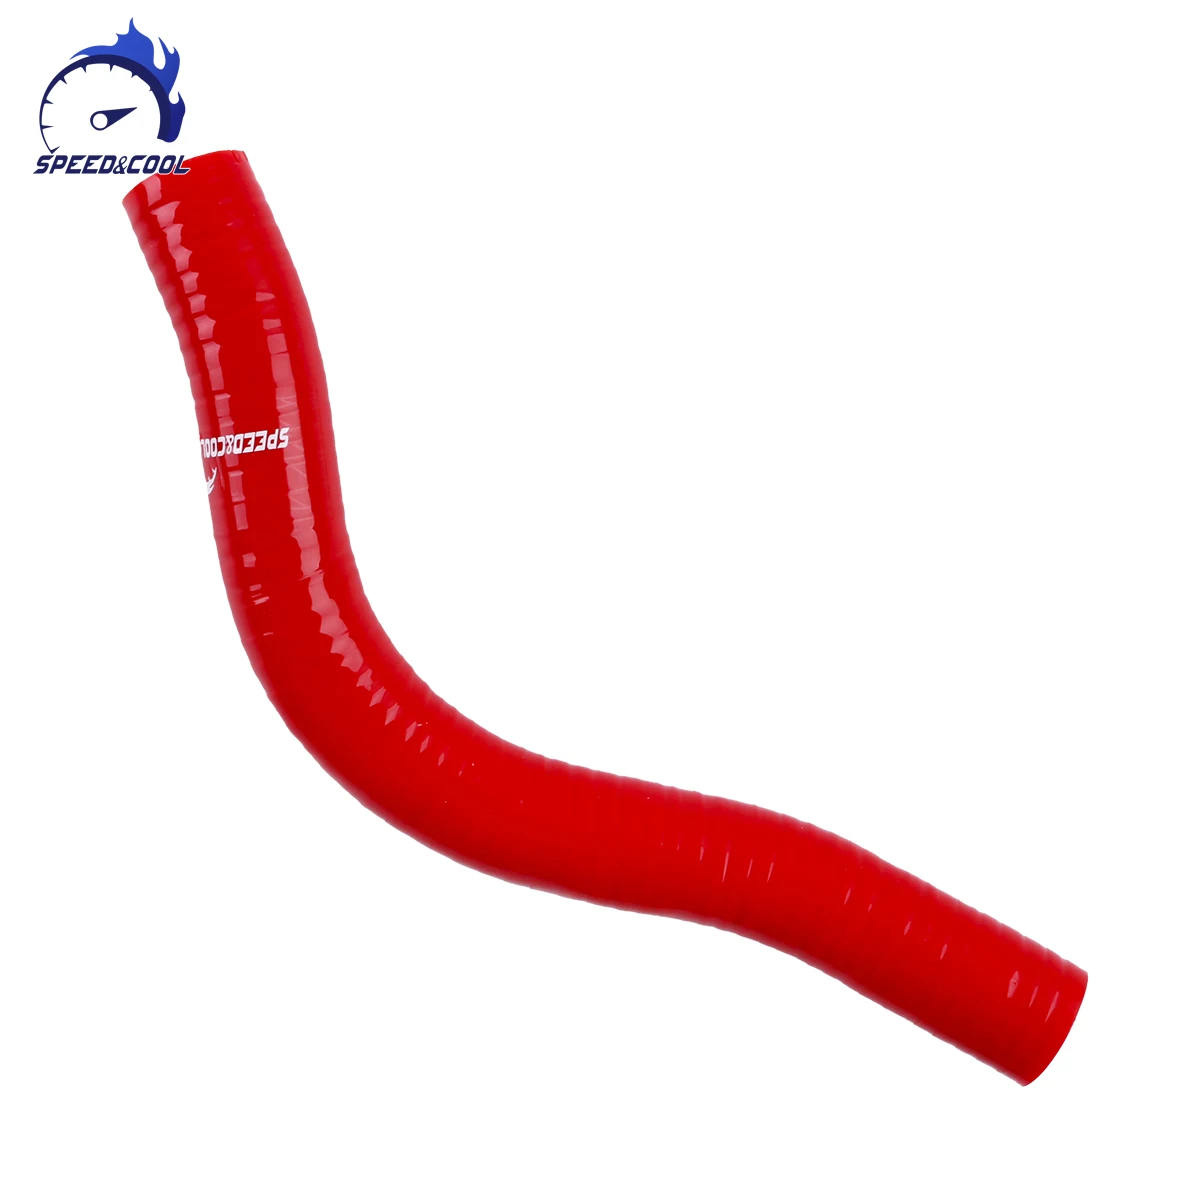 For Audi A3 S3 TT MK1 1.8T 225ps Warm Wind Car Silicone Radiator Coolant Water Hose Tube Pipe Kit images - 6